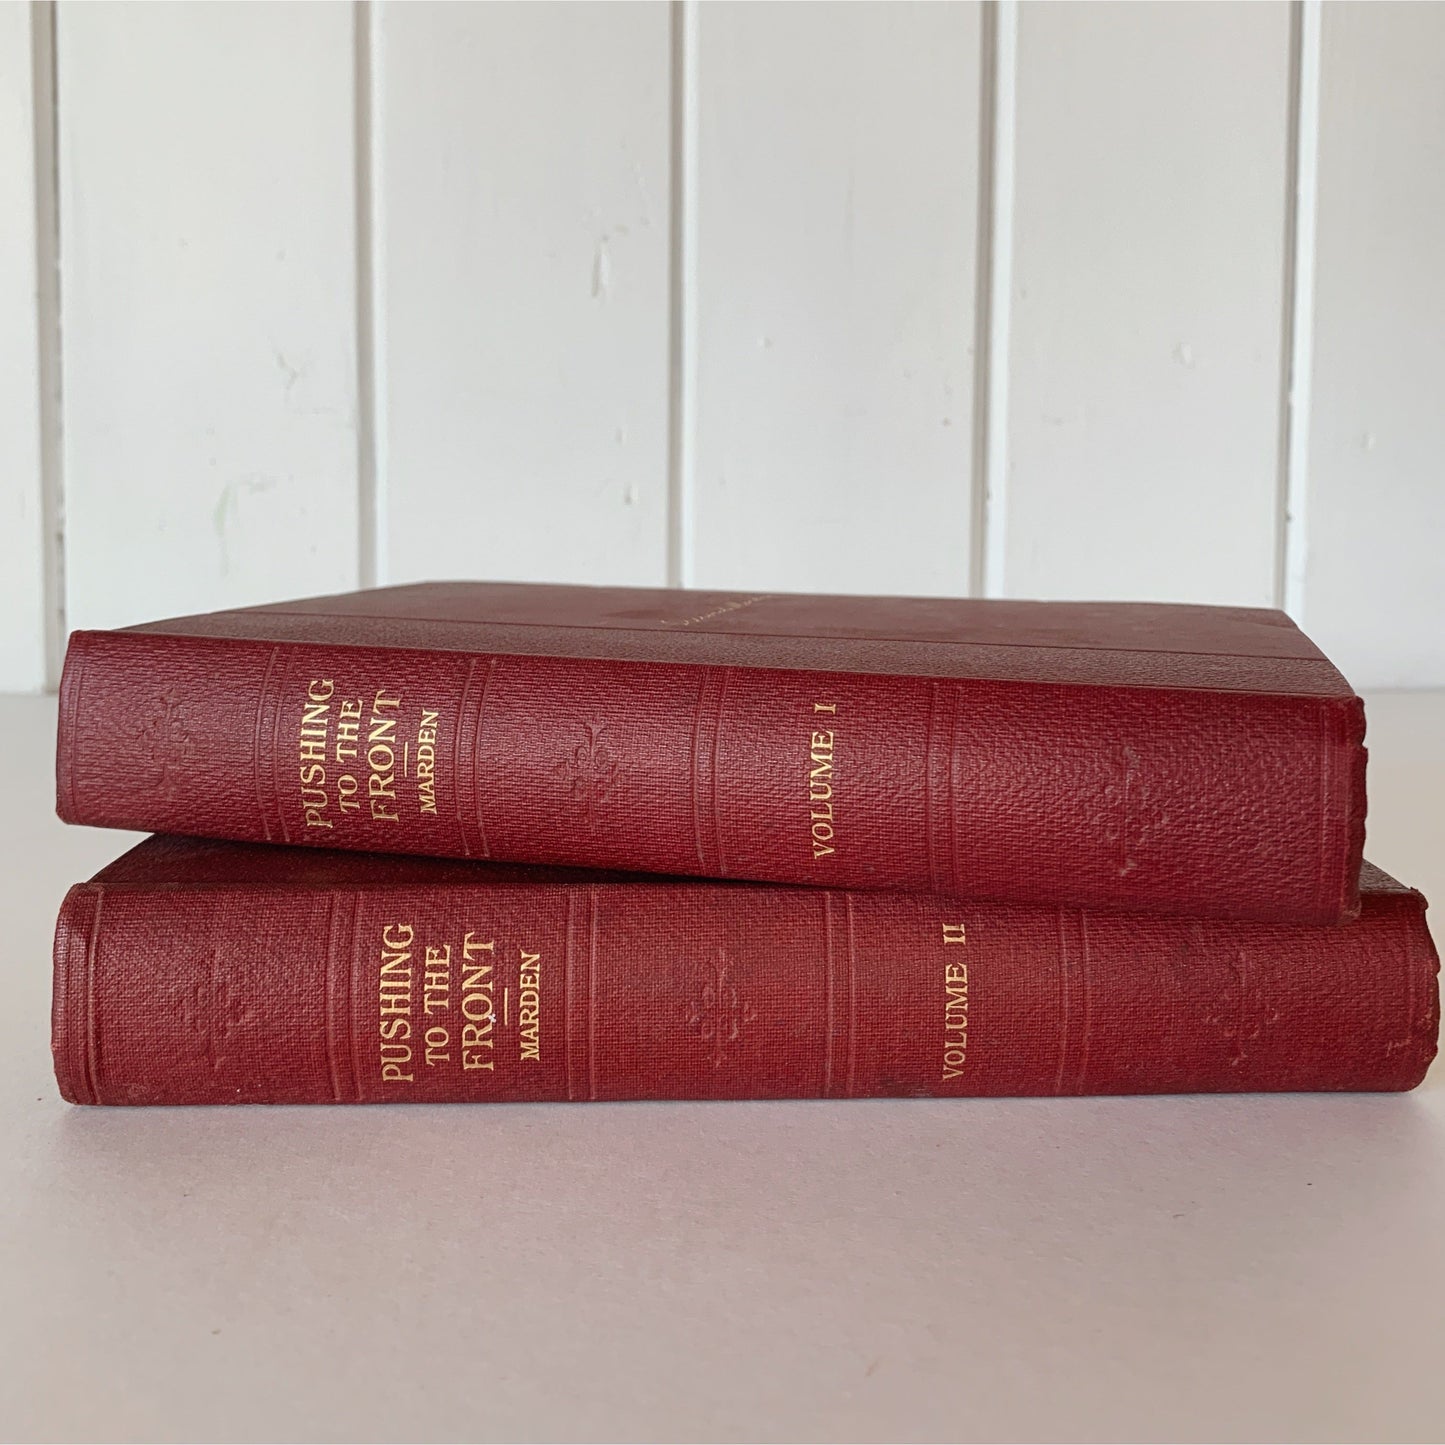 Pushing to the Front, Orison Swett Marden, Antique 1911 Two-Volume Set